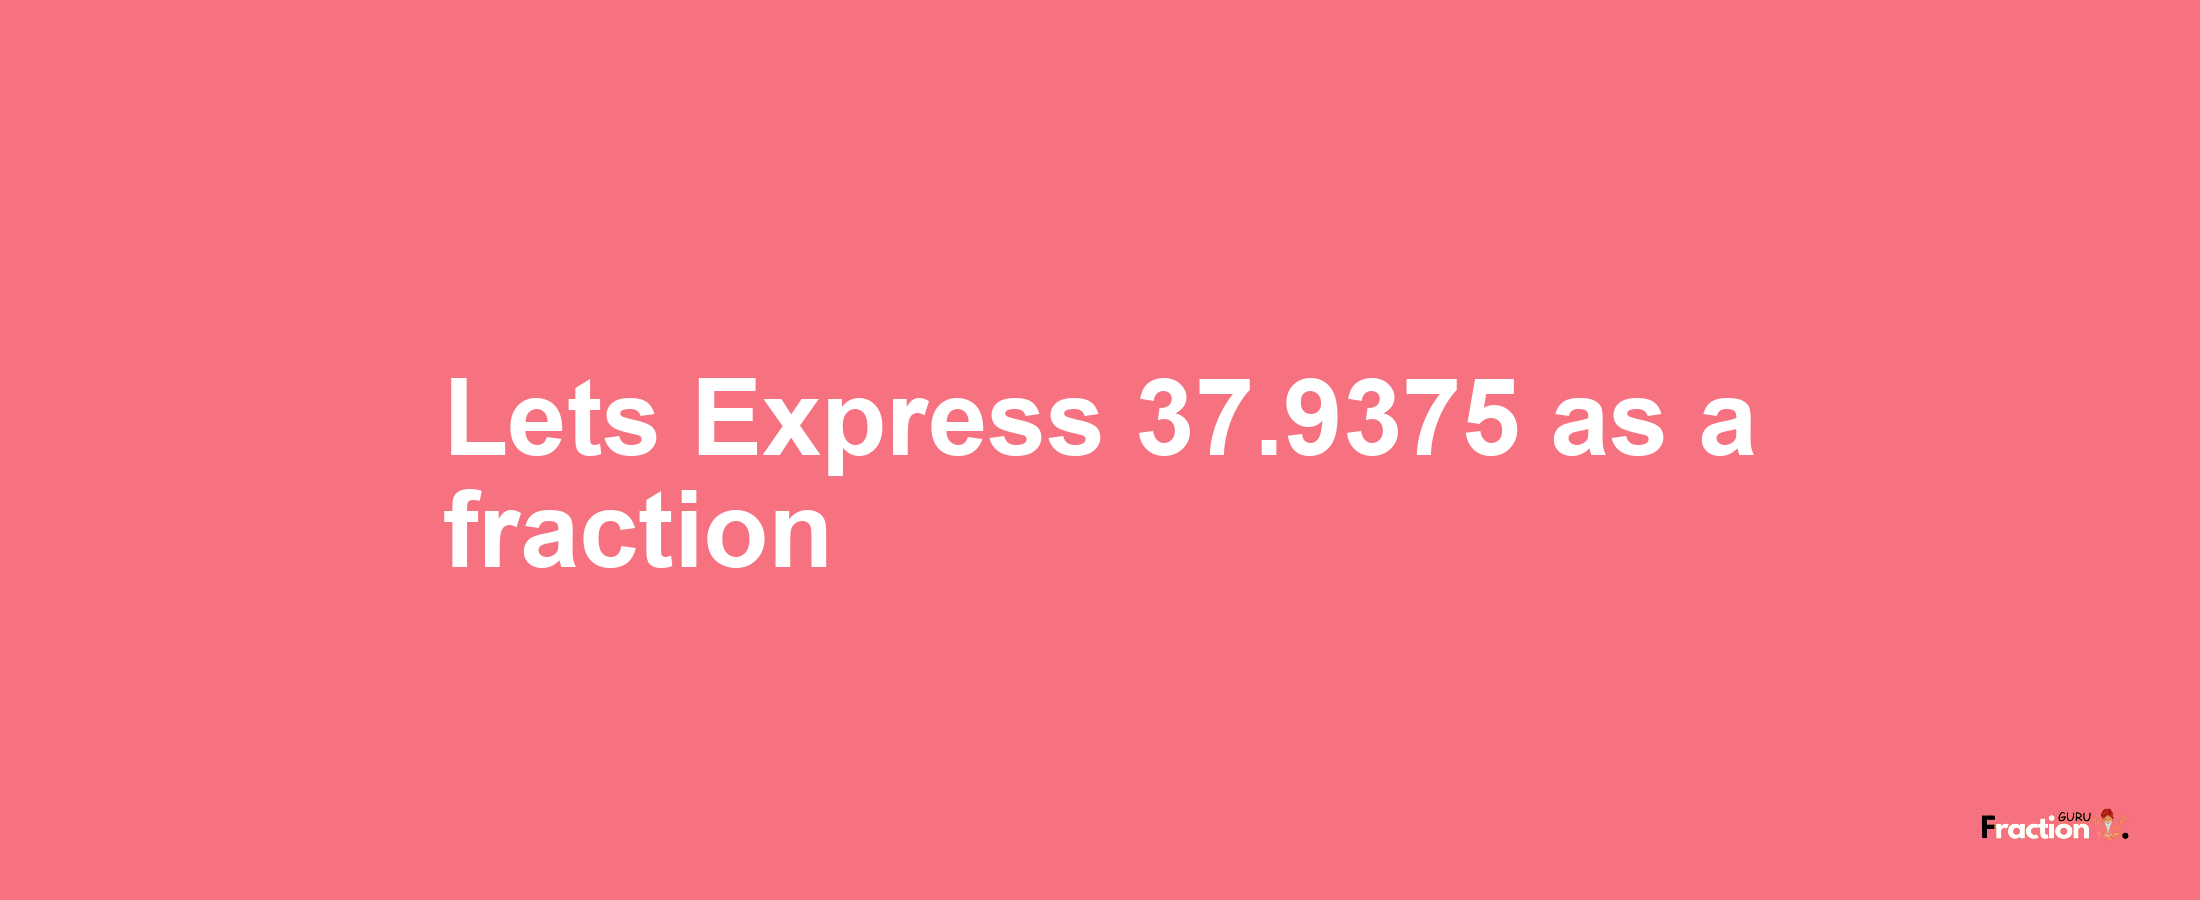 Lets Express 37.9375 as afraction